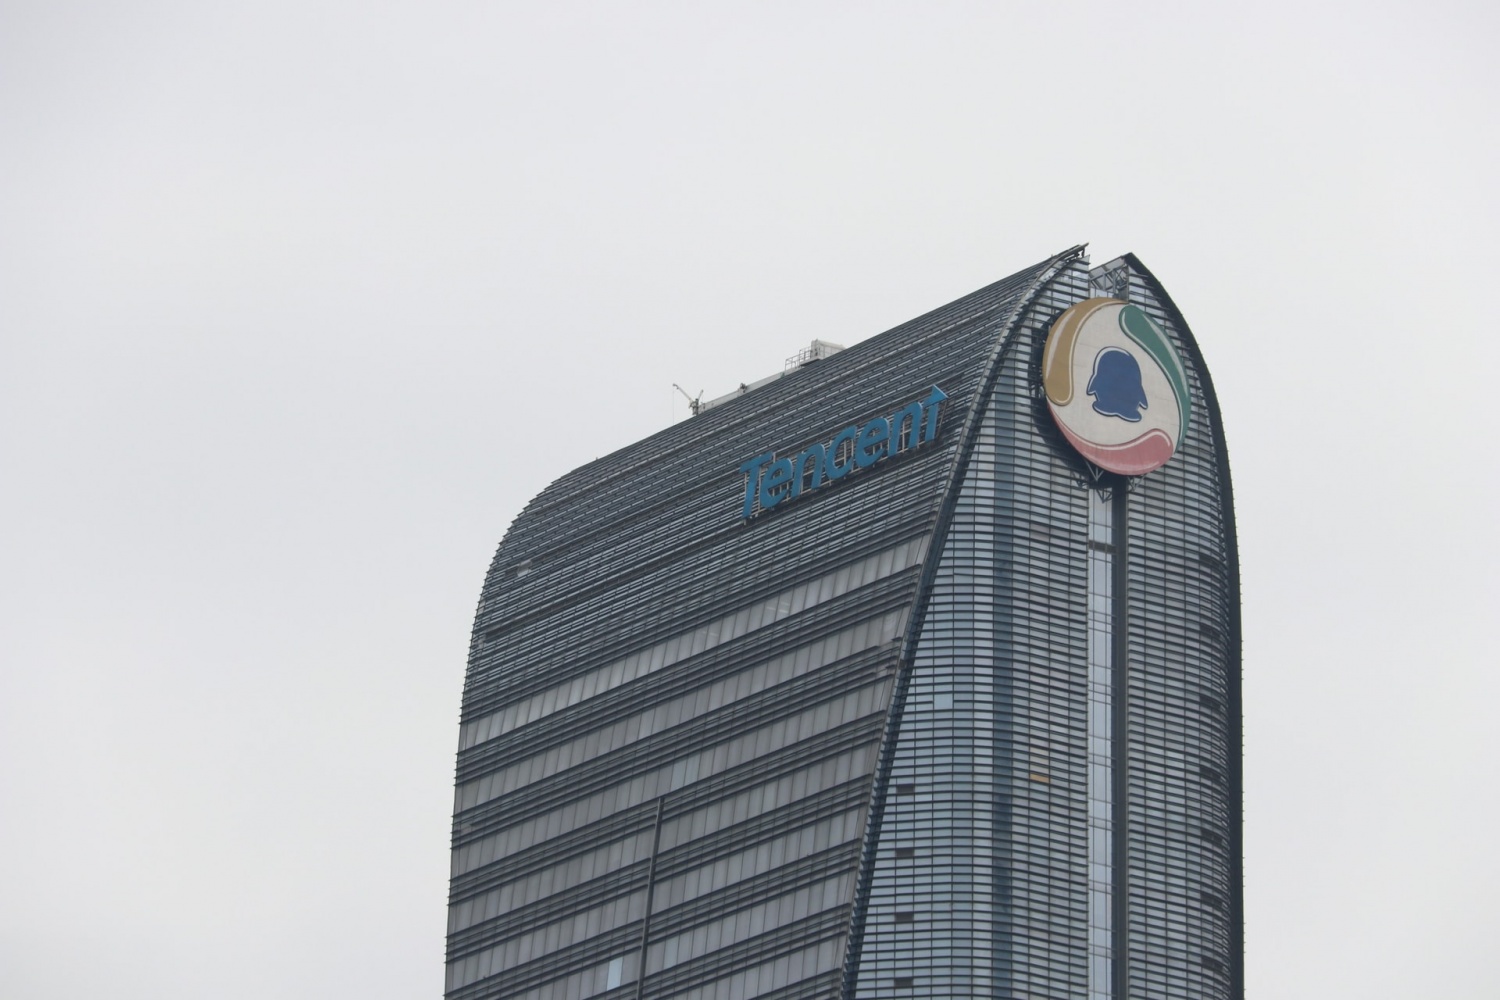 Tencent Shares 'Sharply' Plunged in Q4 2021 Amid China's Crackdown